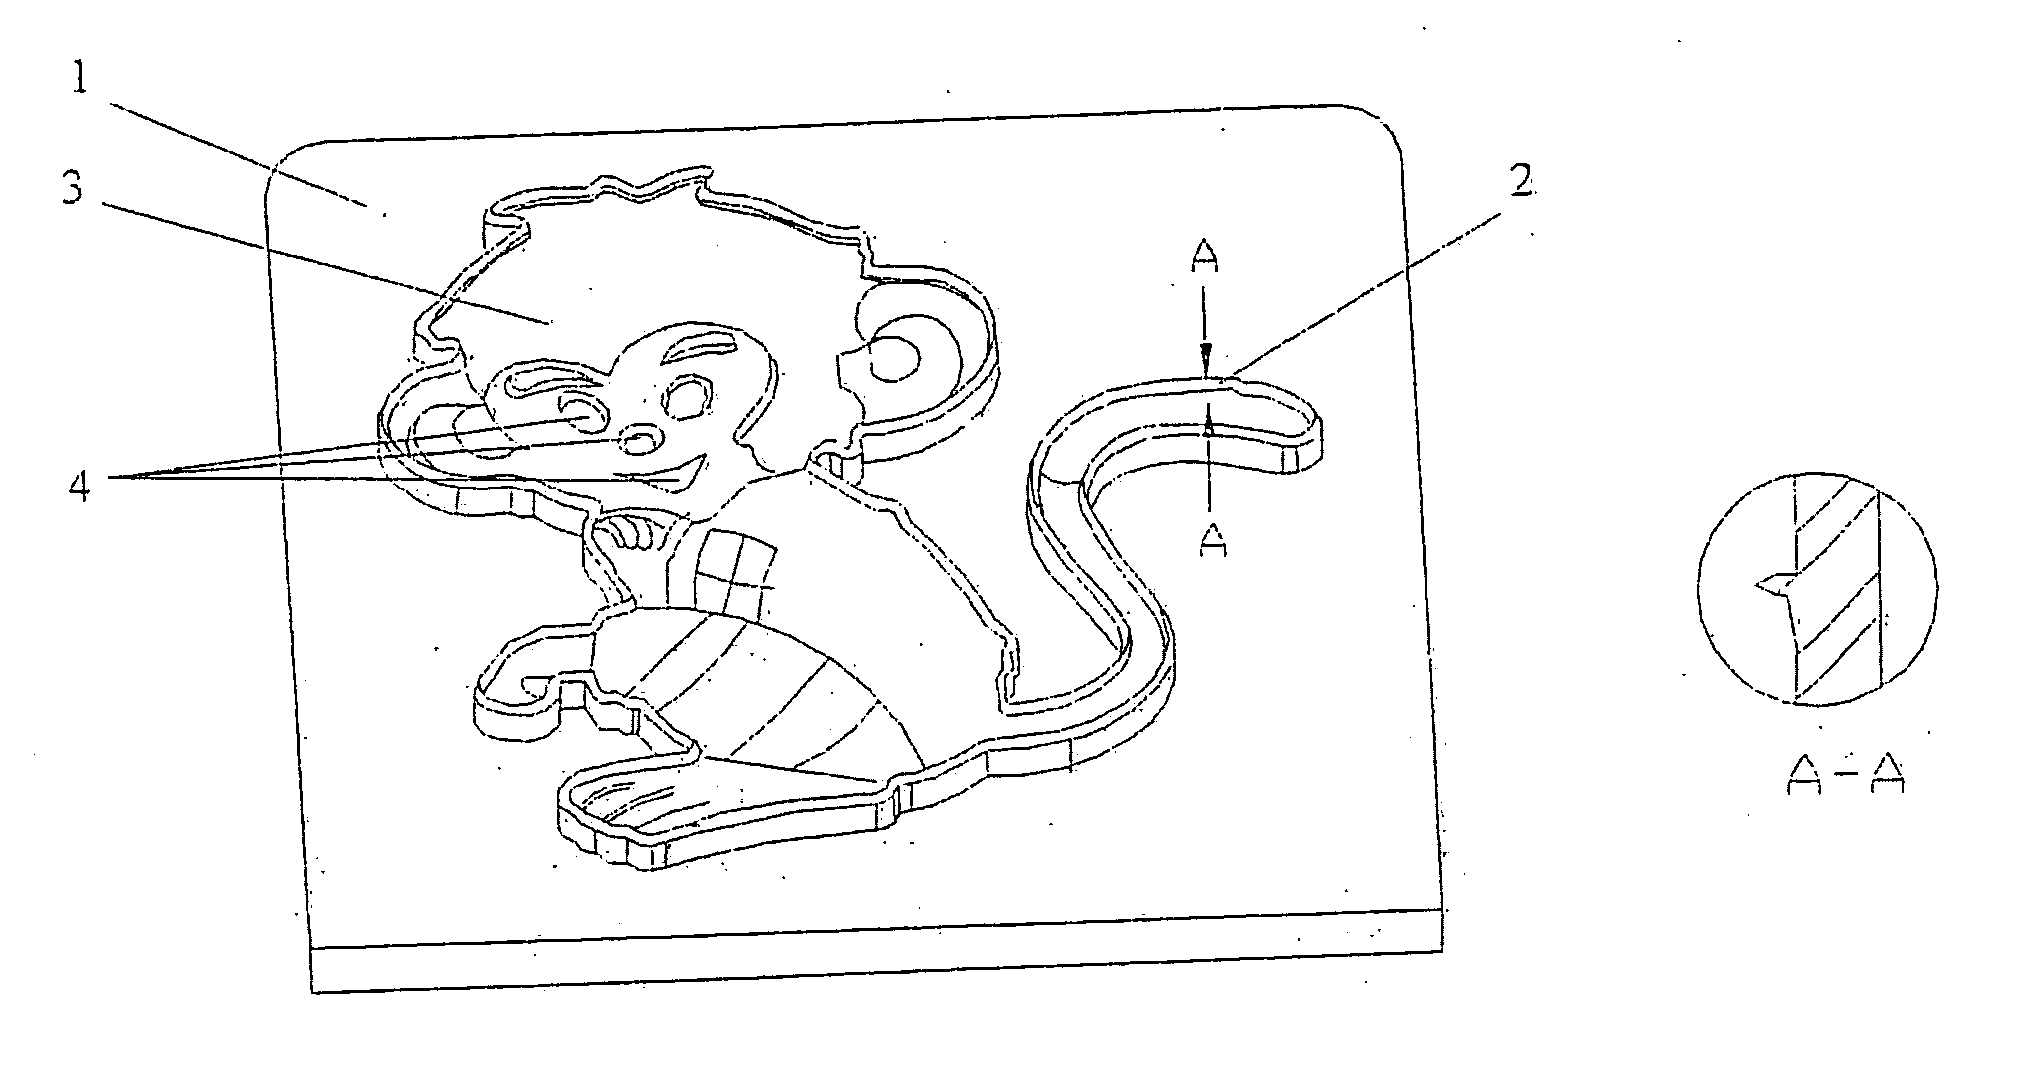 Image cutter for producing stereo relief image